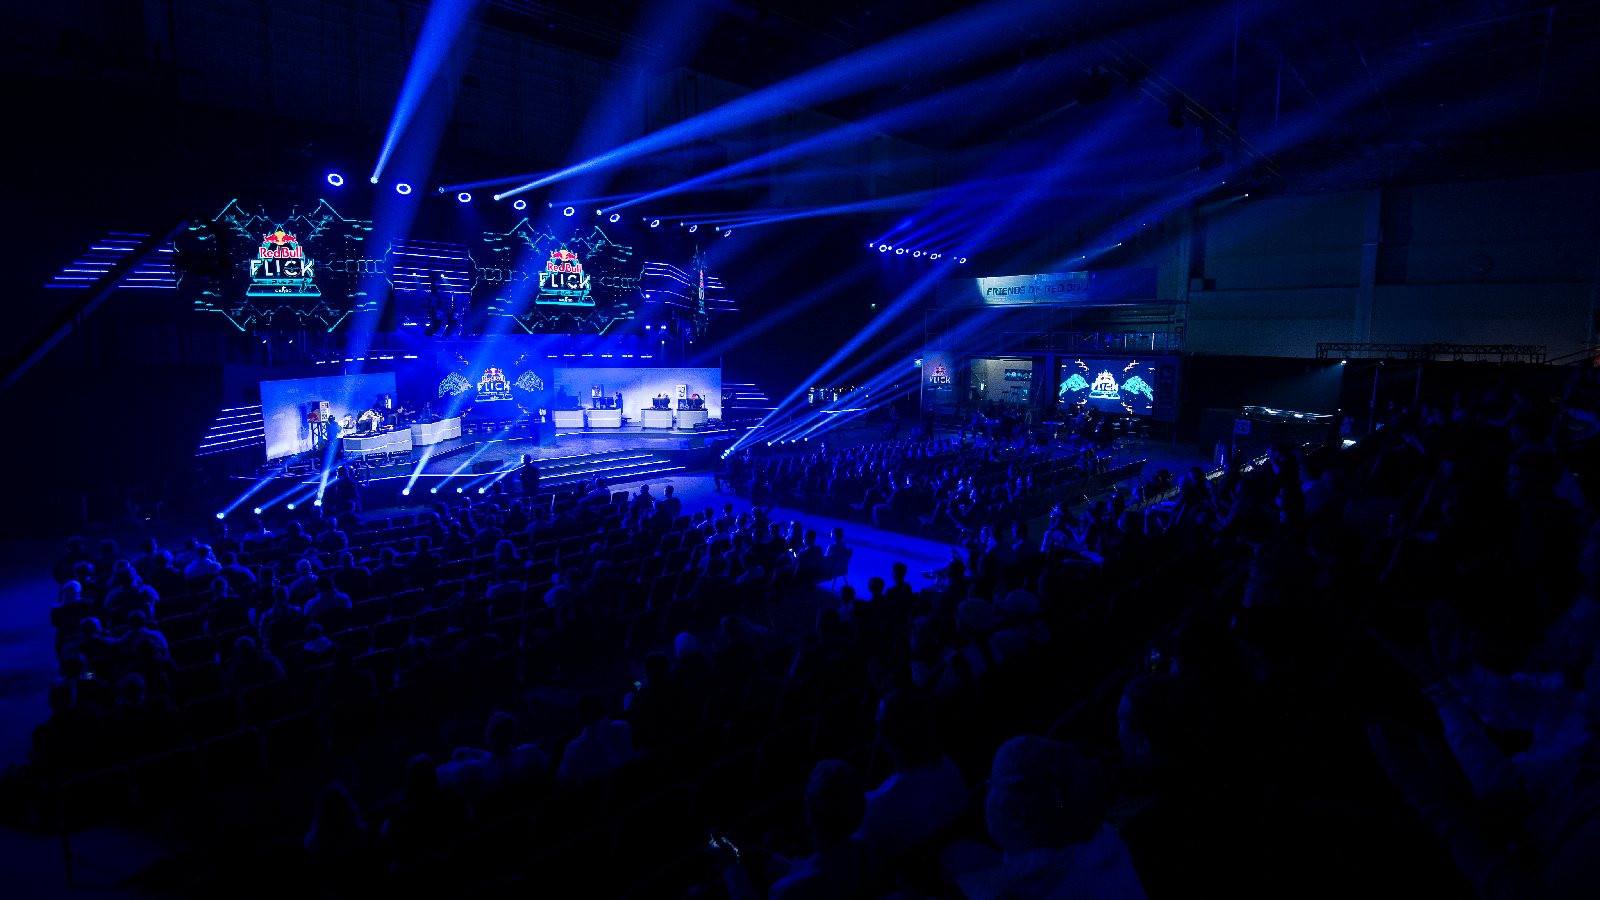 Valorant Esports stage and crowd